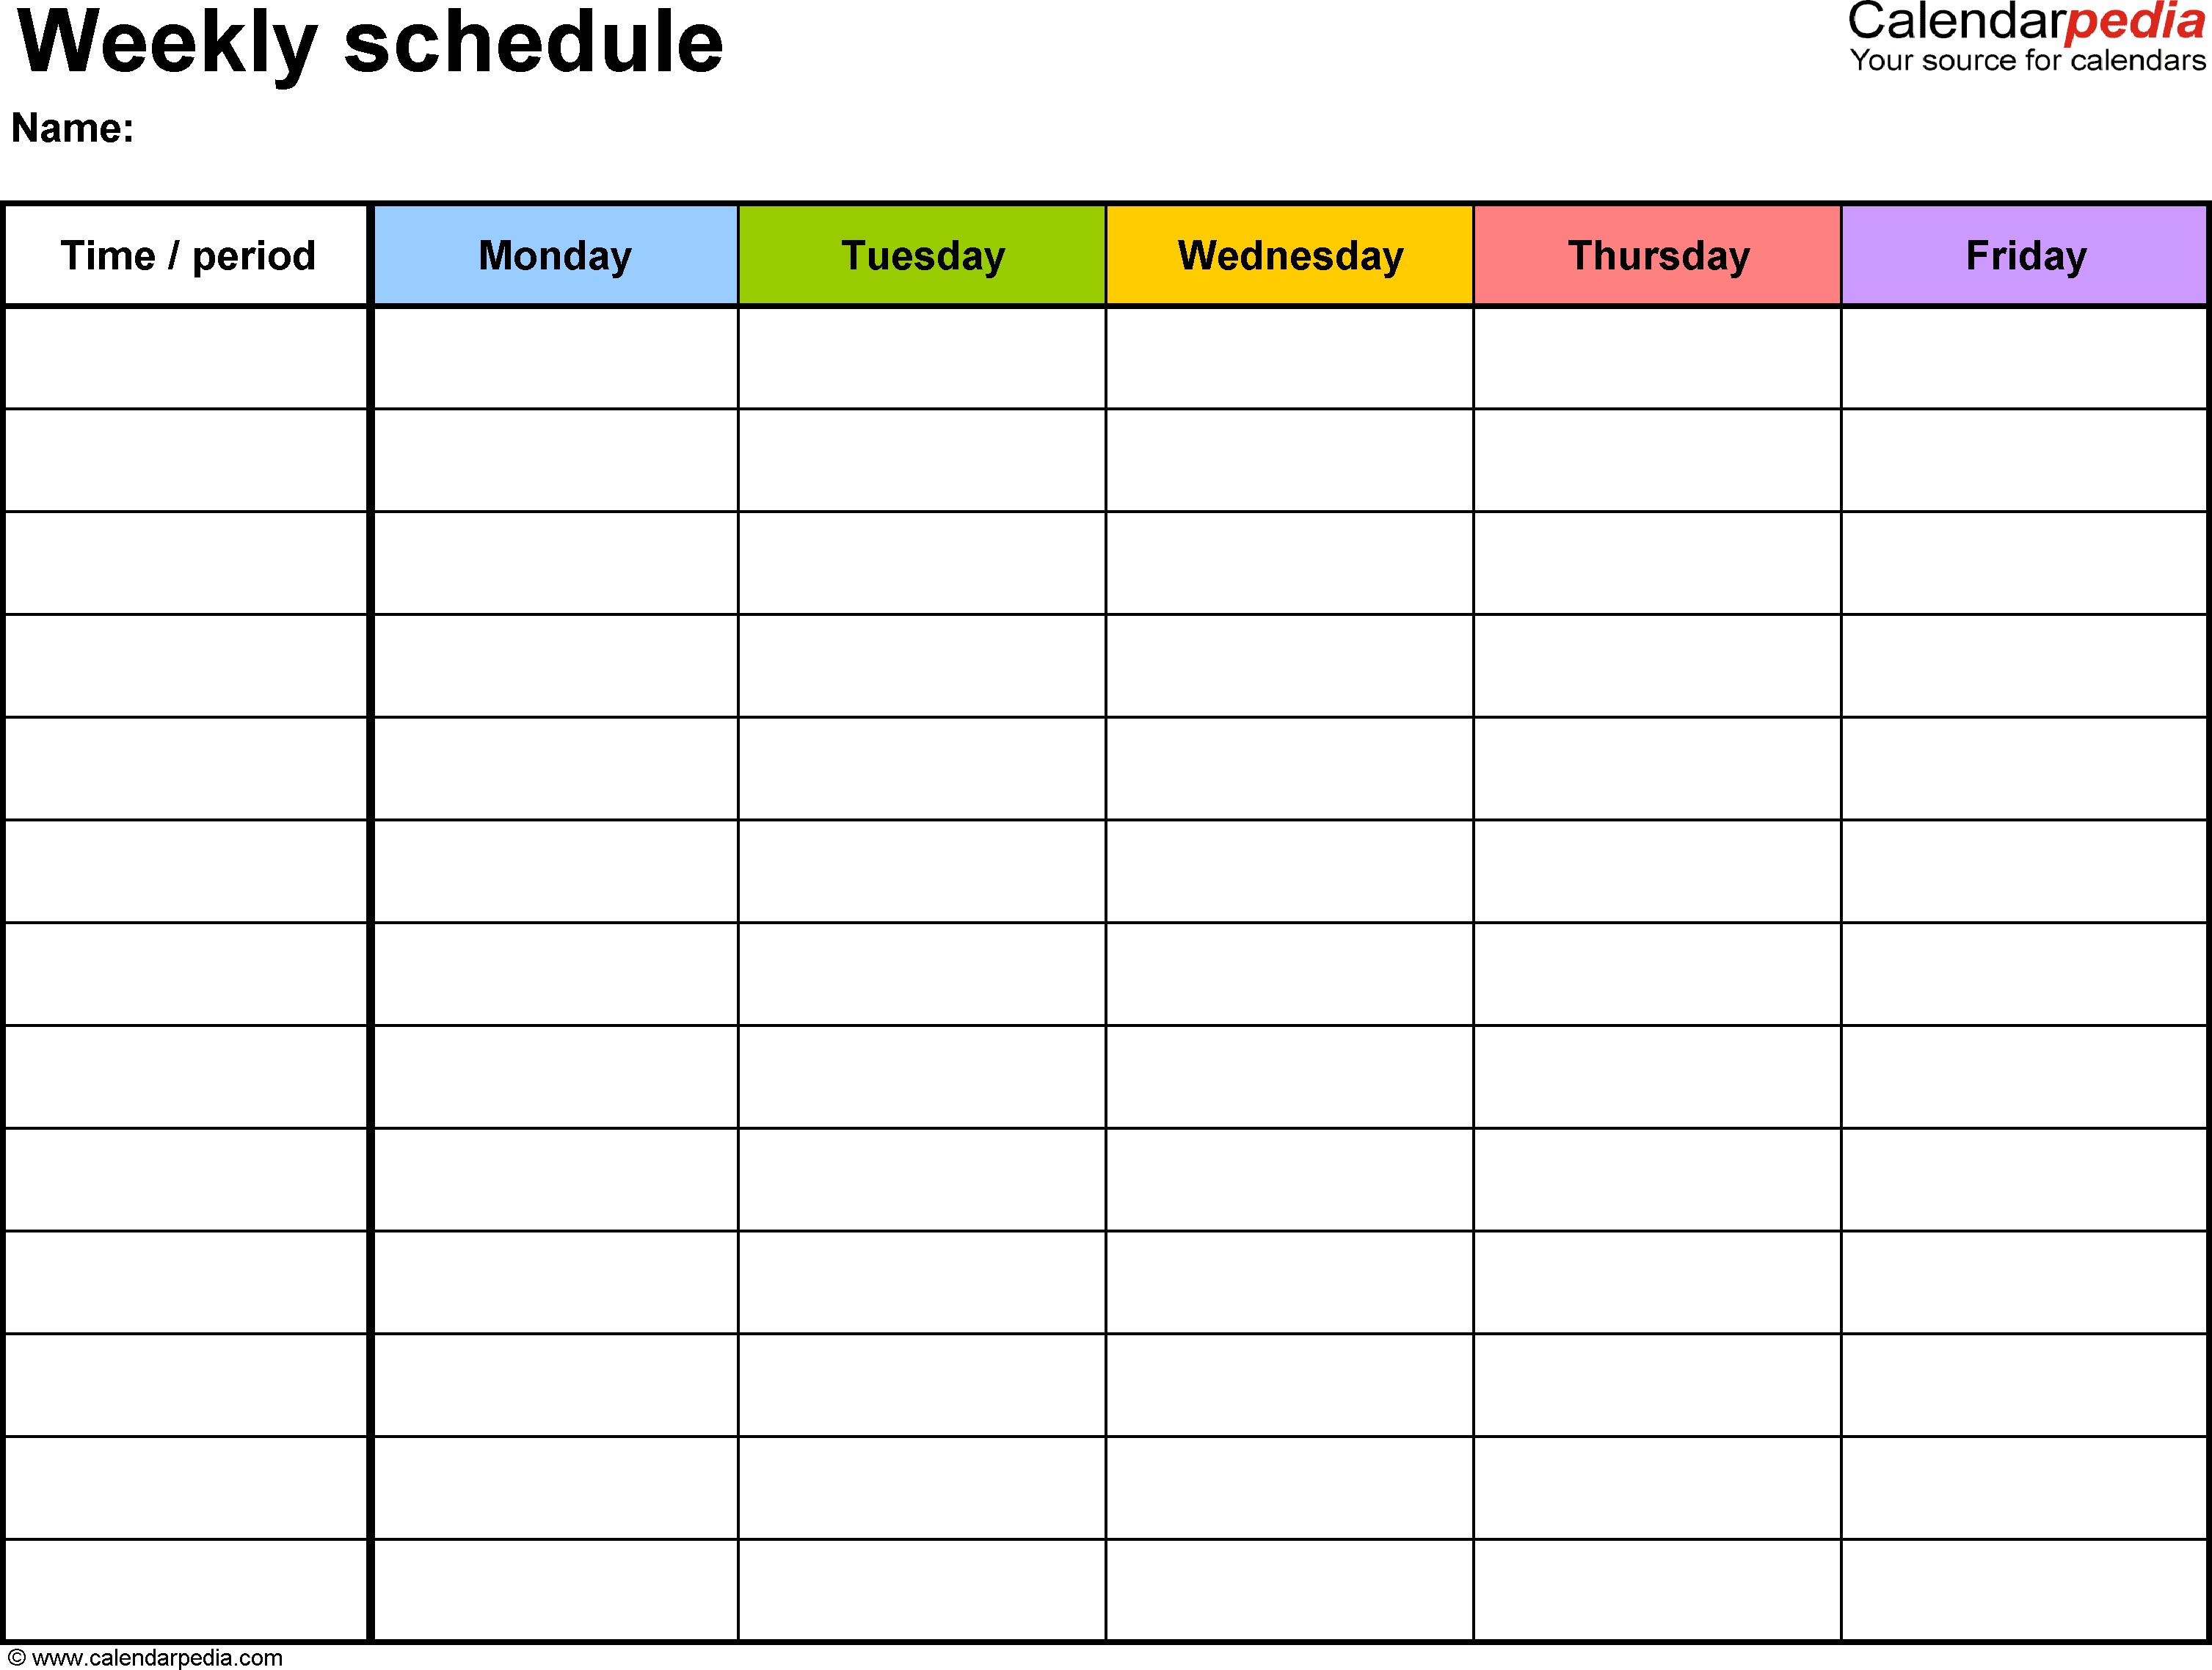 Free Weekly Schedule Templates For Word - 18 Templates - Free Printable School Agenda Templates